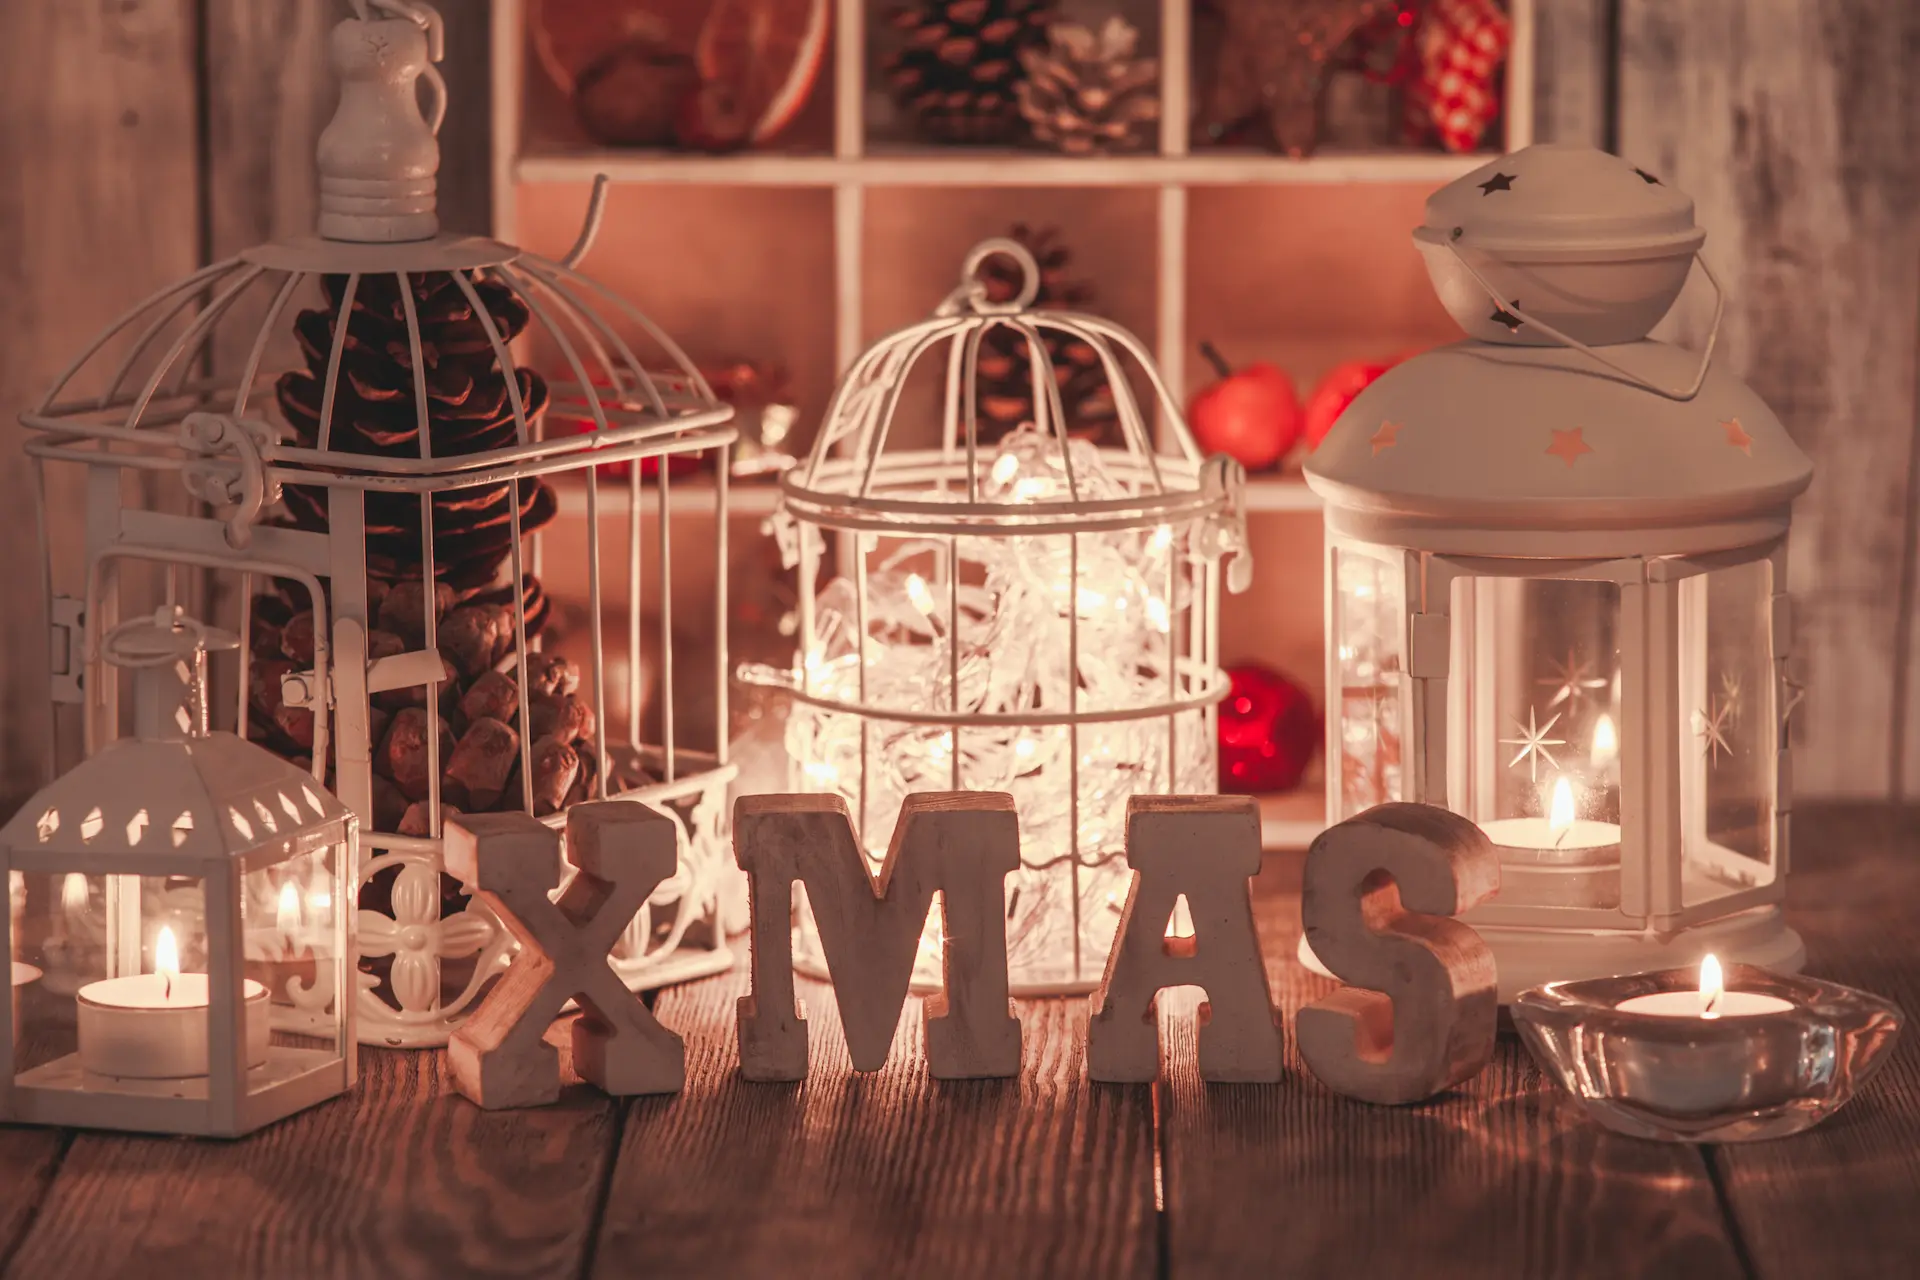 lowly lit display shabby chic christmas decorations and decorative items